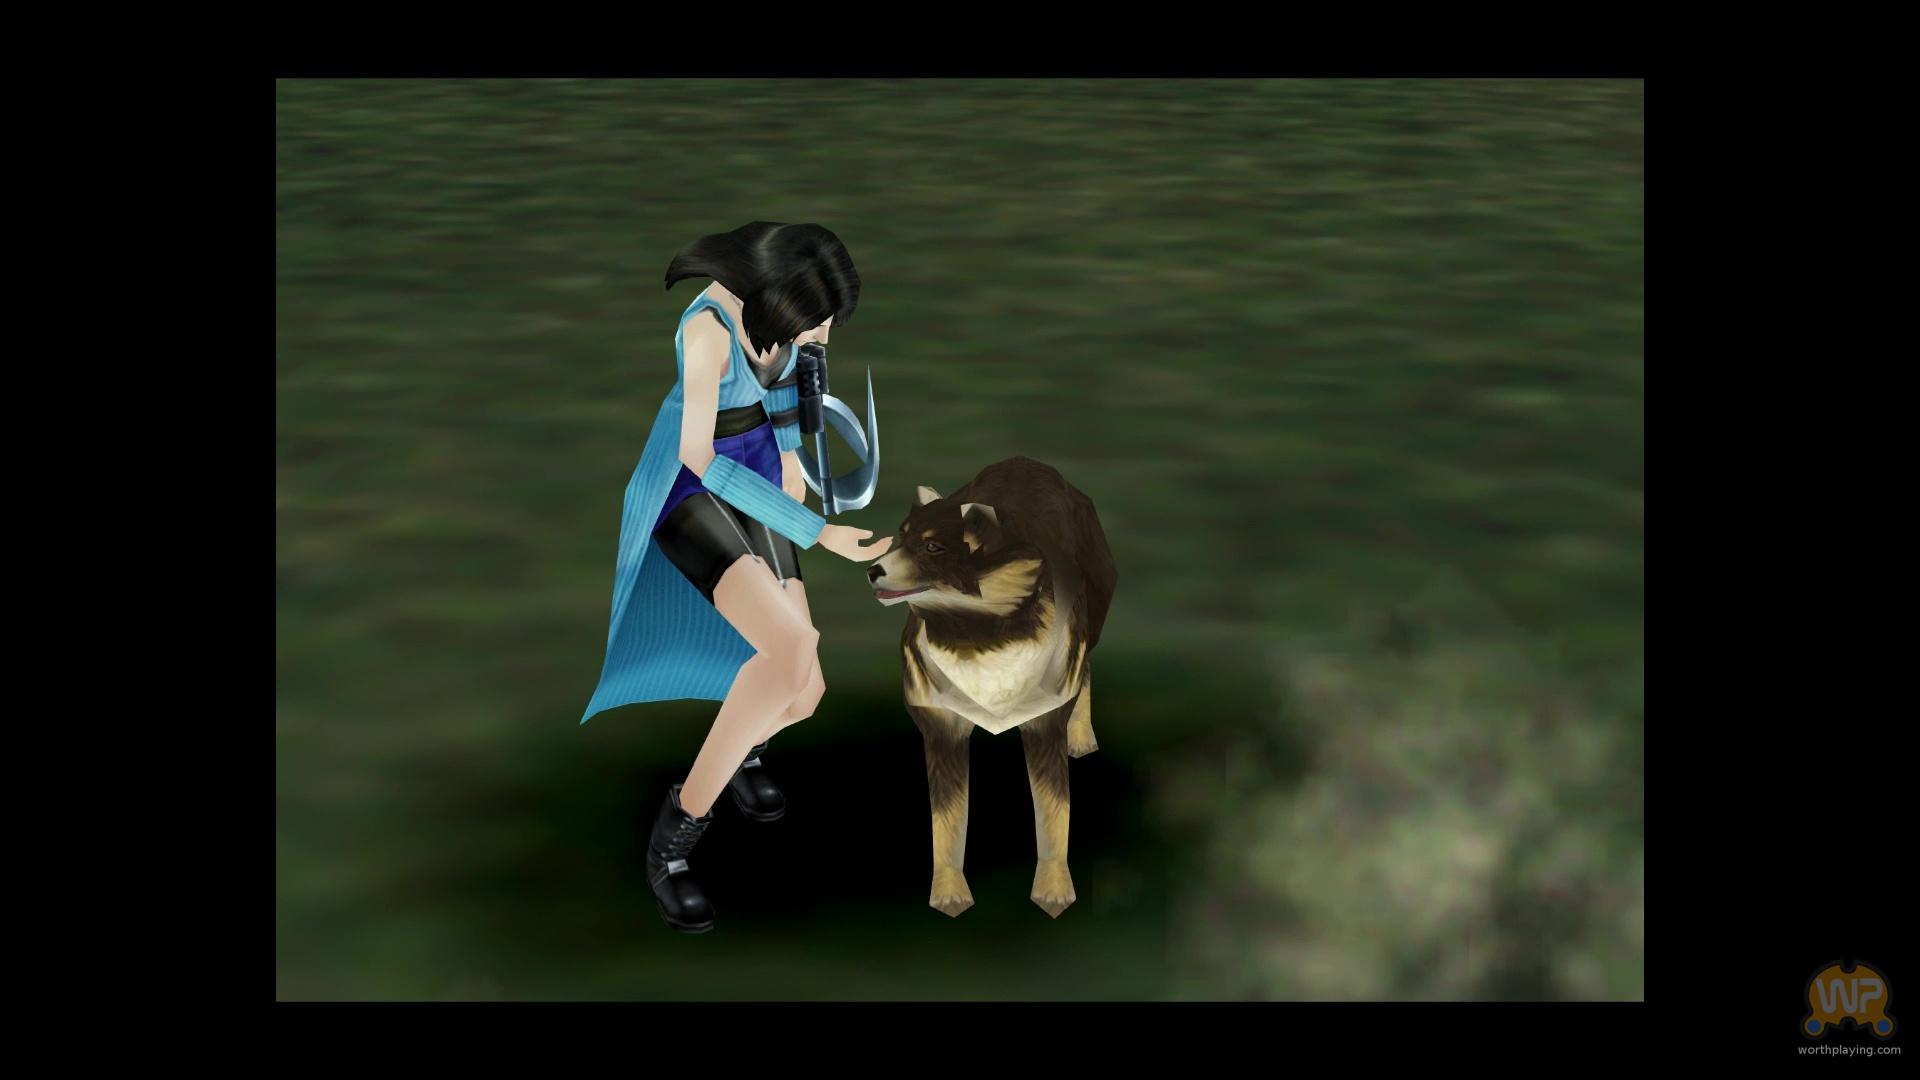 Worthplaying 'Final Fantasy VIII Remastered' (ALL) - New Screens ...